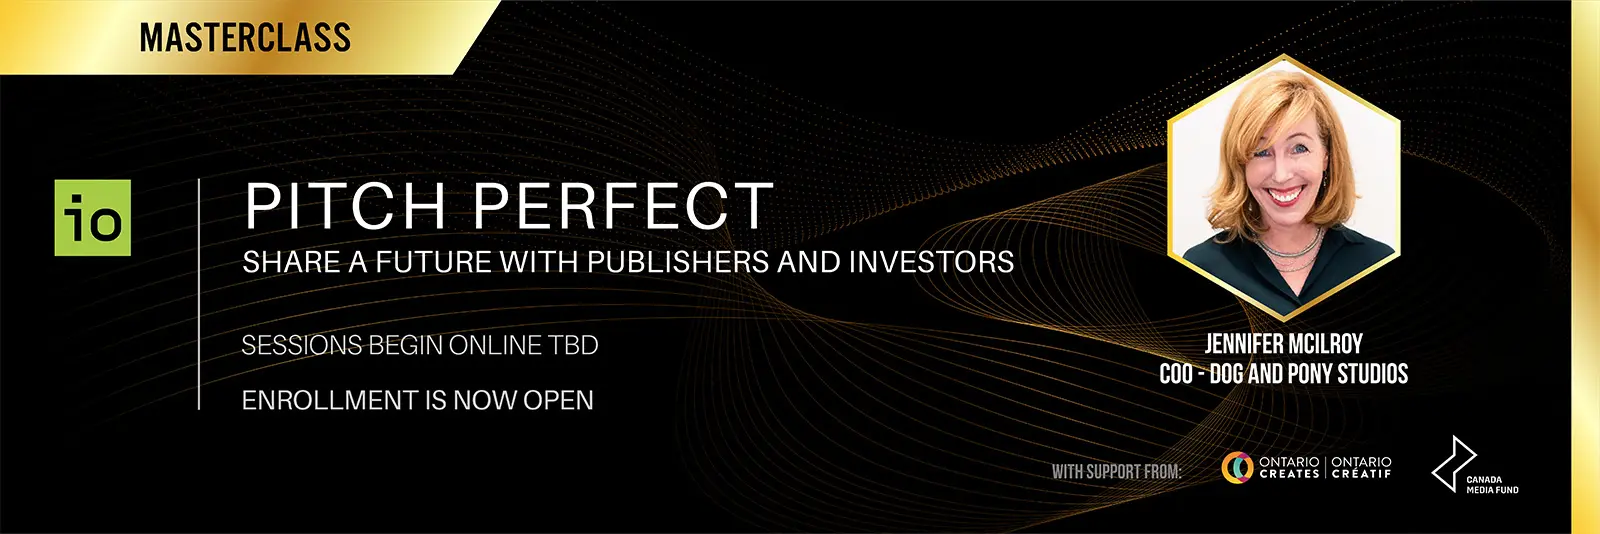 Masterclass: Pitch Perfect - Share a Future With Publishers and Investors